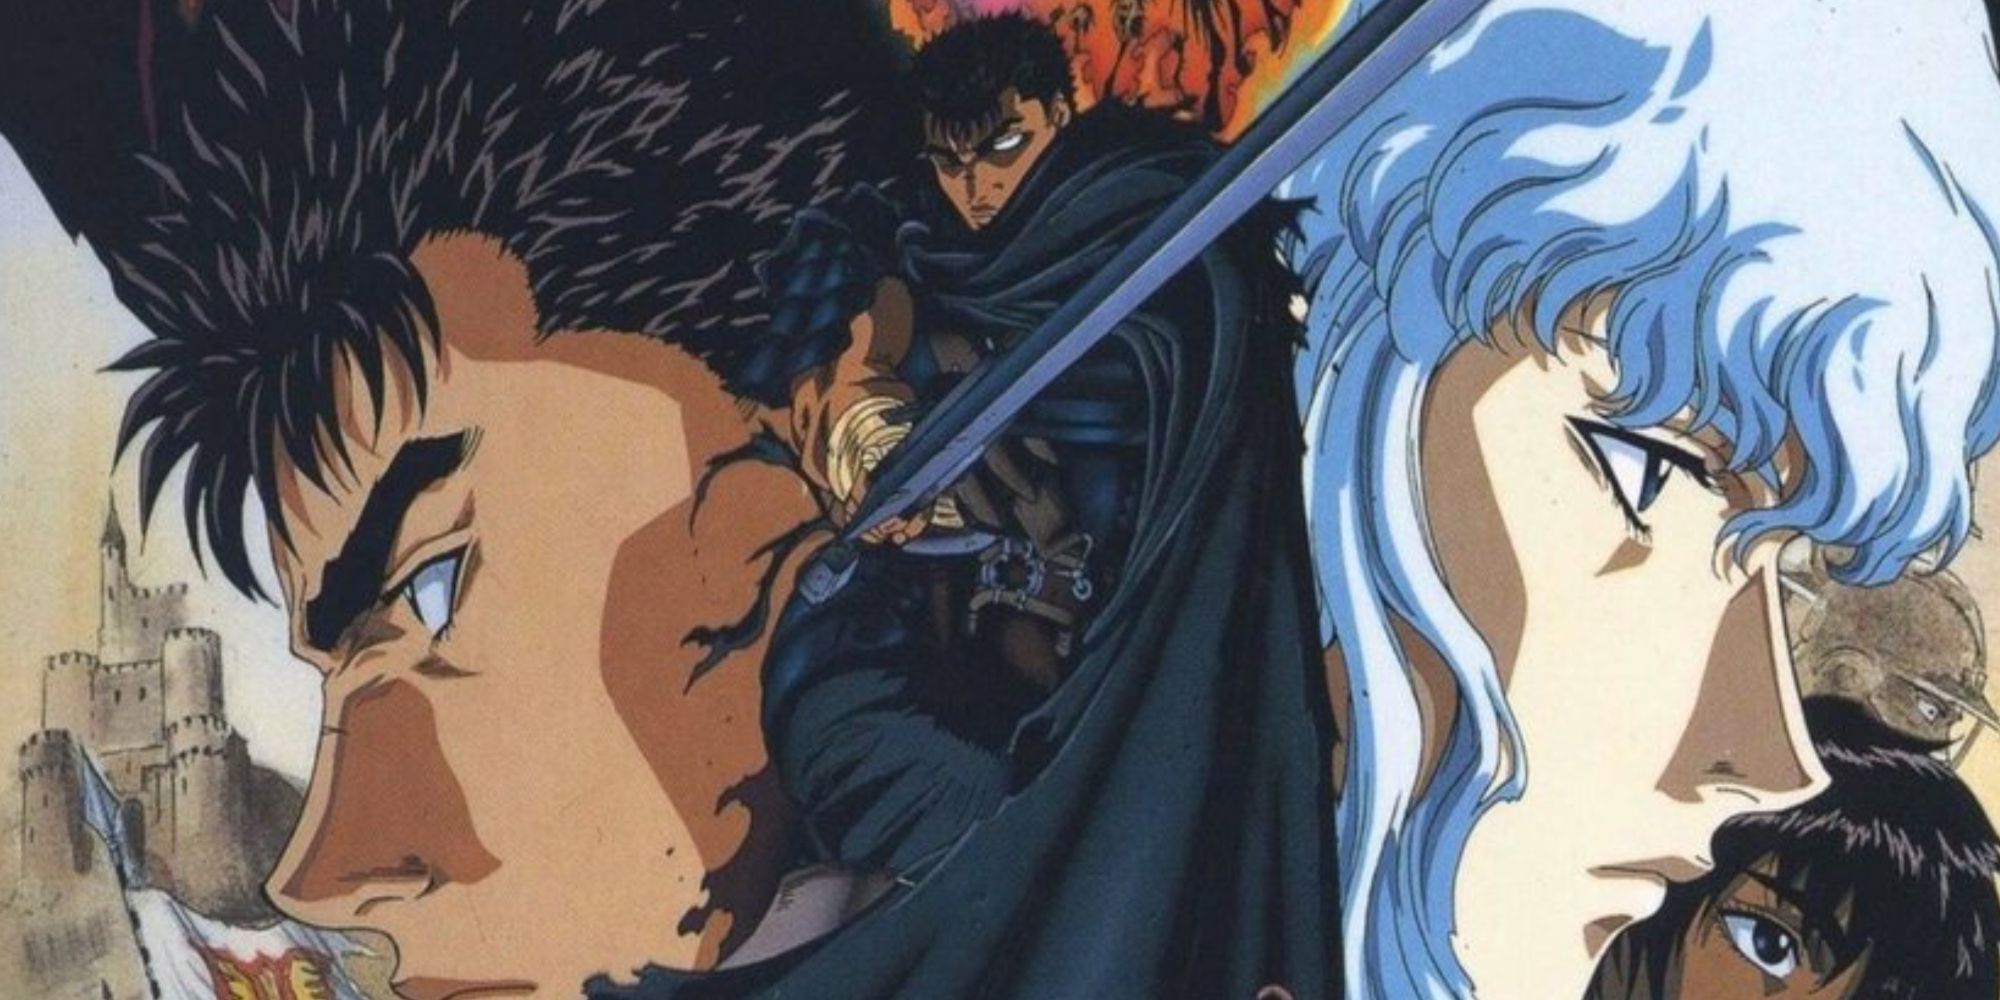 Two rivals from the Berserk anime face off in opposite directions, with another character pointing a sword between them.